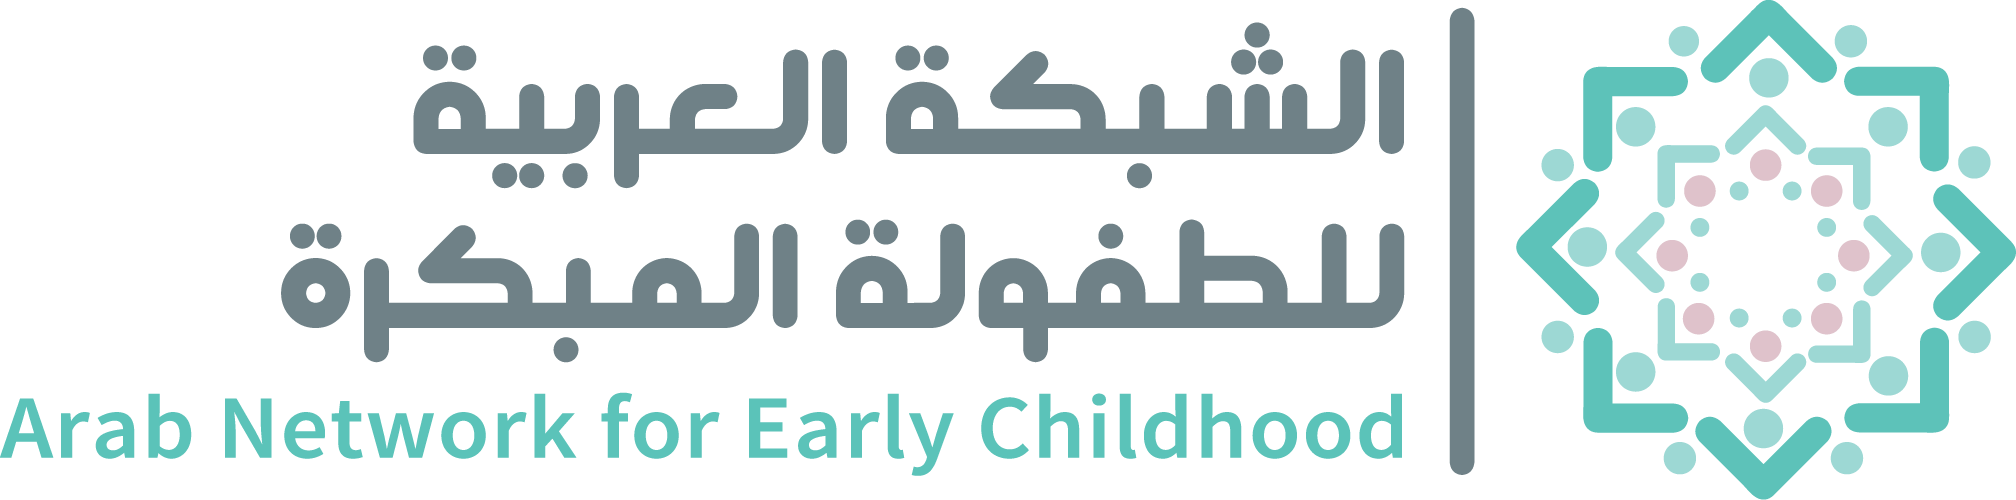 Logo for Arab Network for Early Childhood (ANECD)